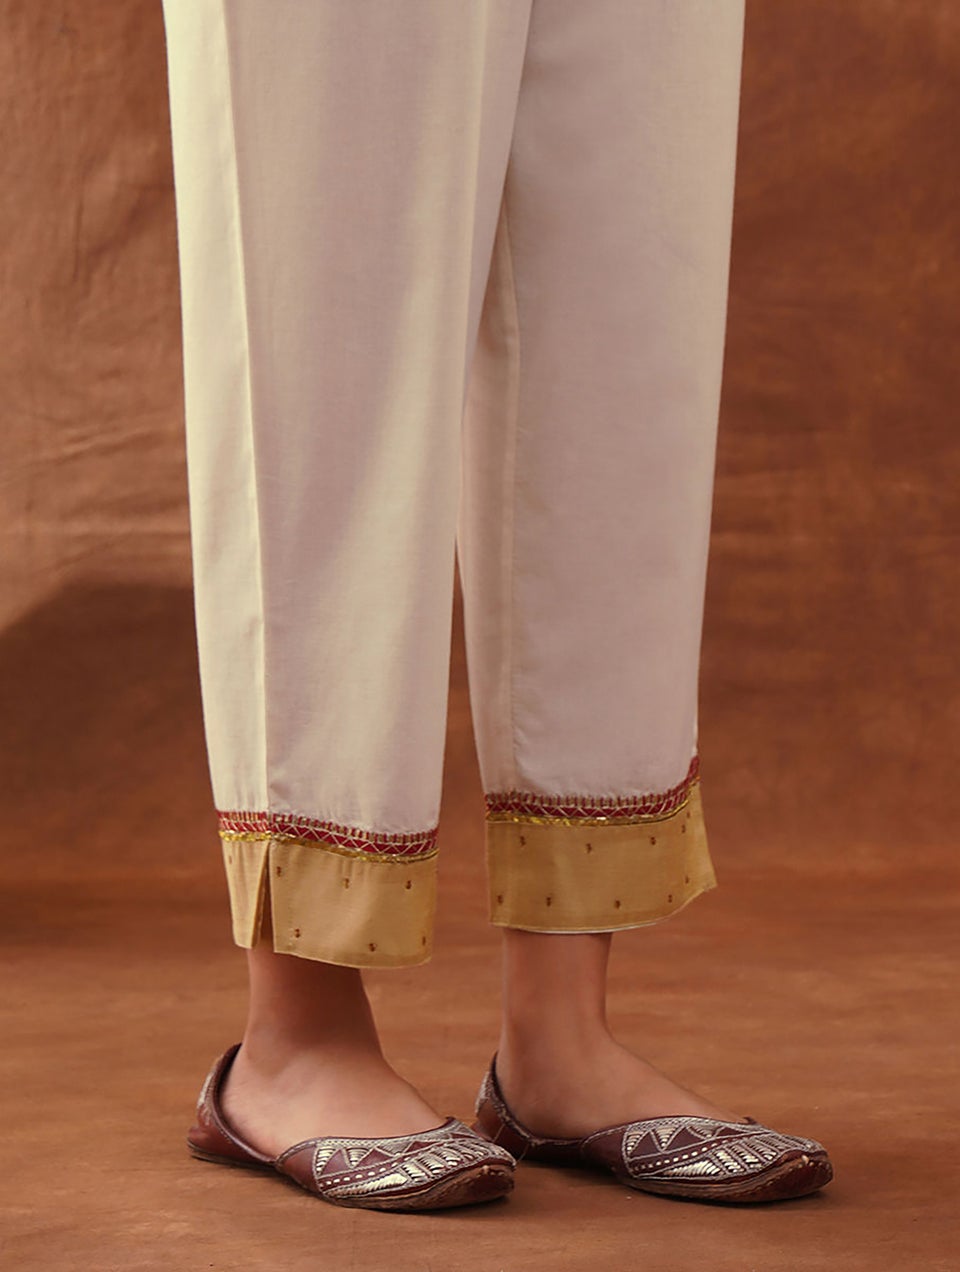 Women Ivory Hand Embroidered Elasticated Waist Cotton Pants - XS